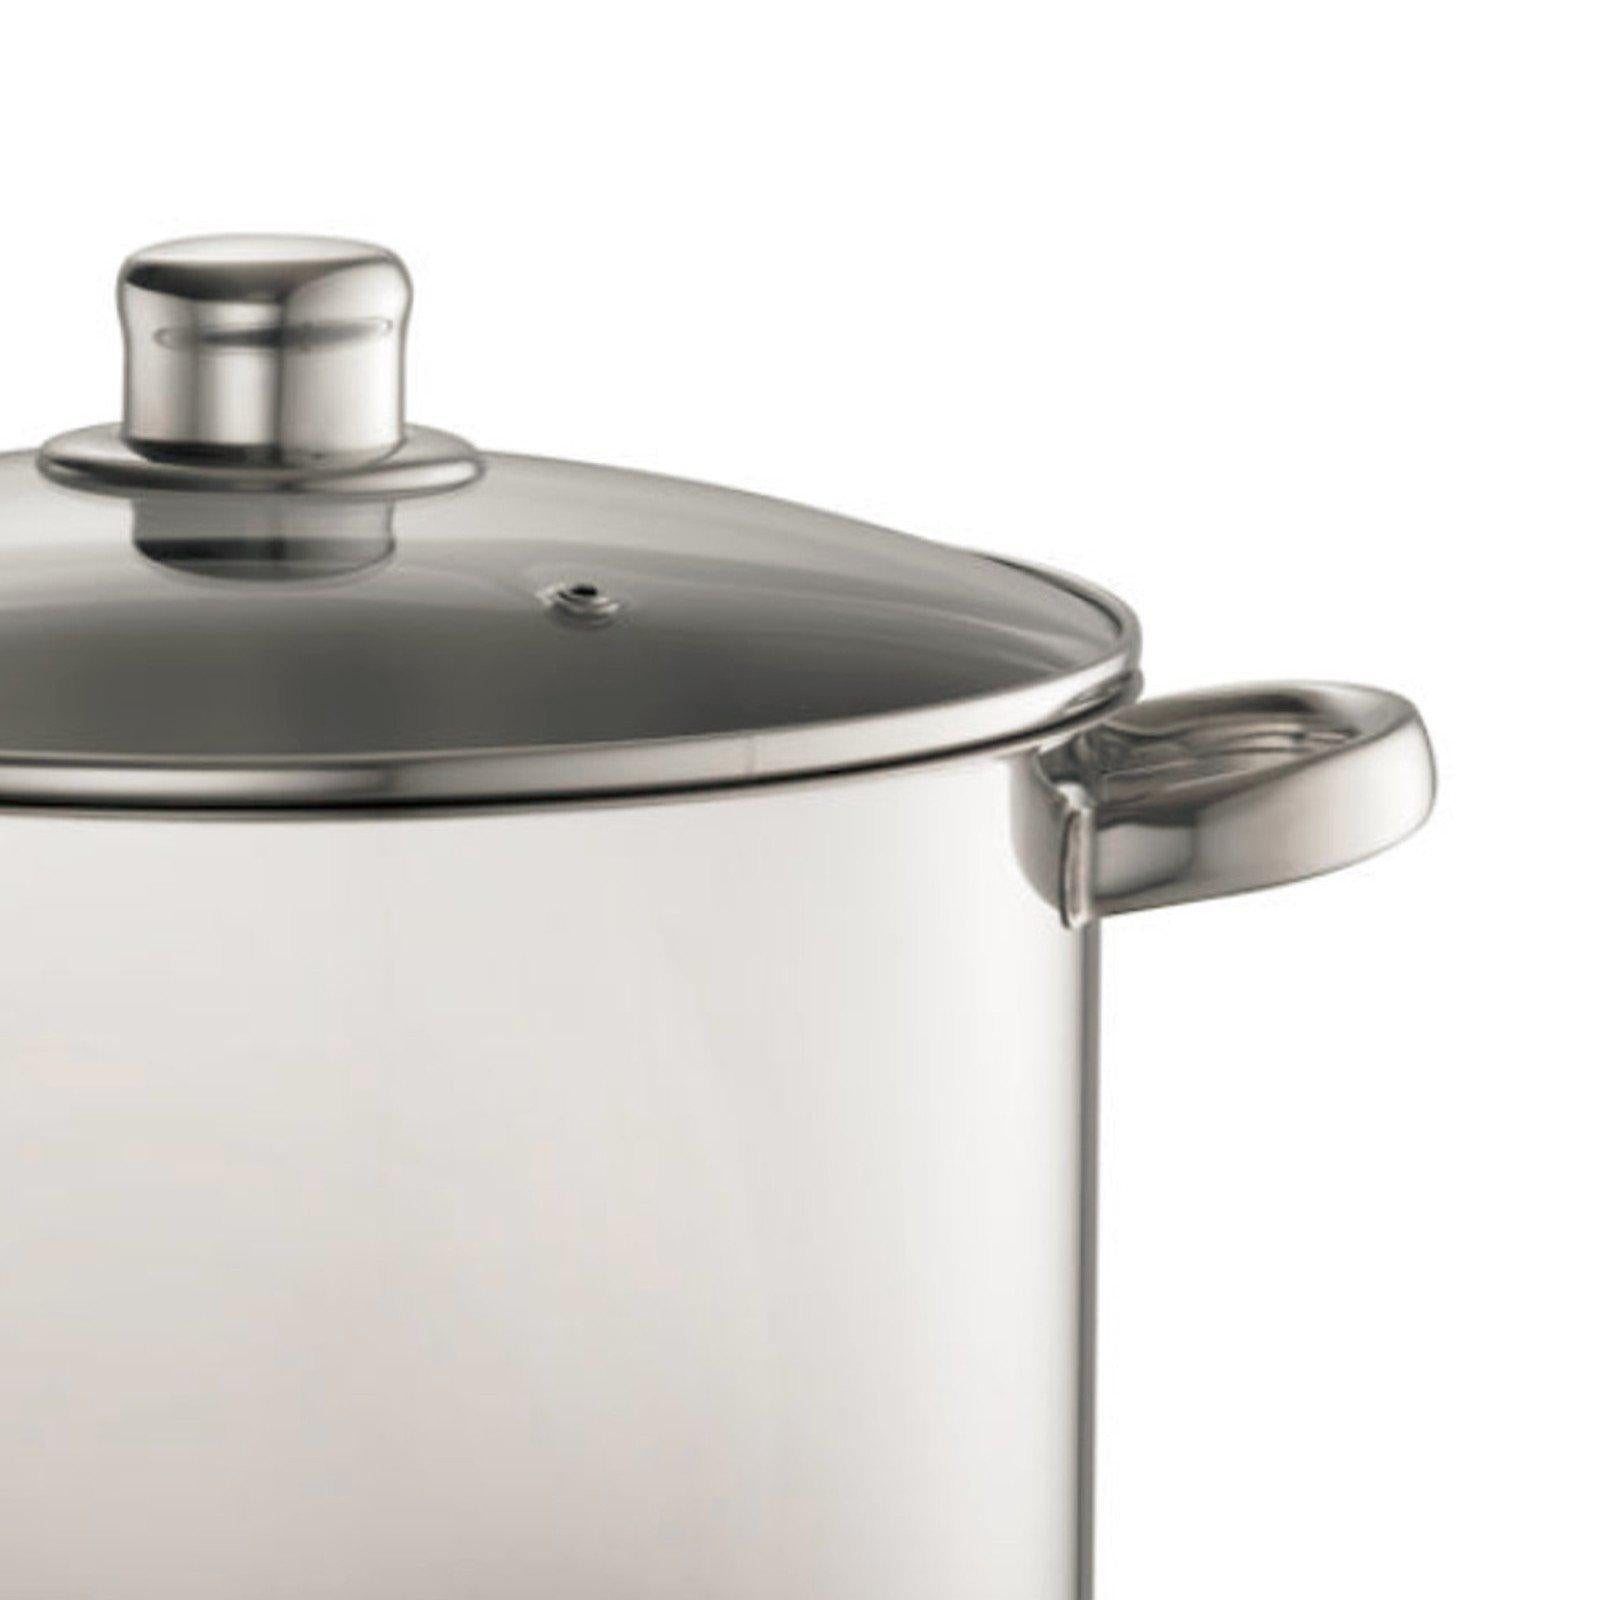 Davis & Waddell 8 Litre Stock Pot With Glass Lid-stock pot-Chef's Quality Cookware